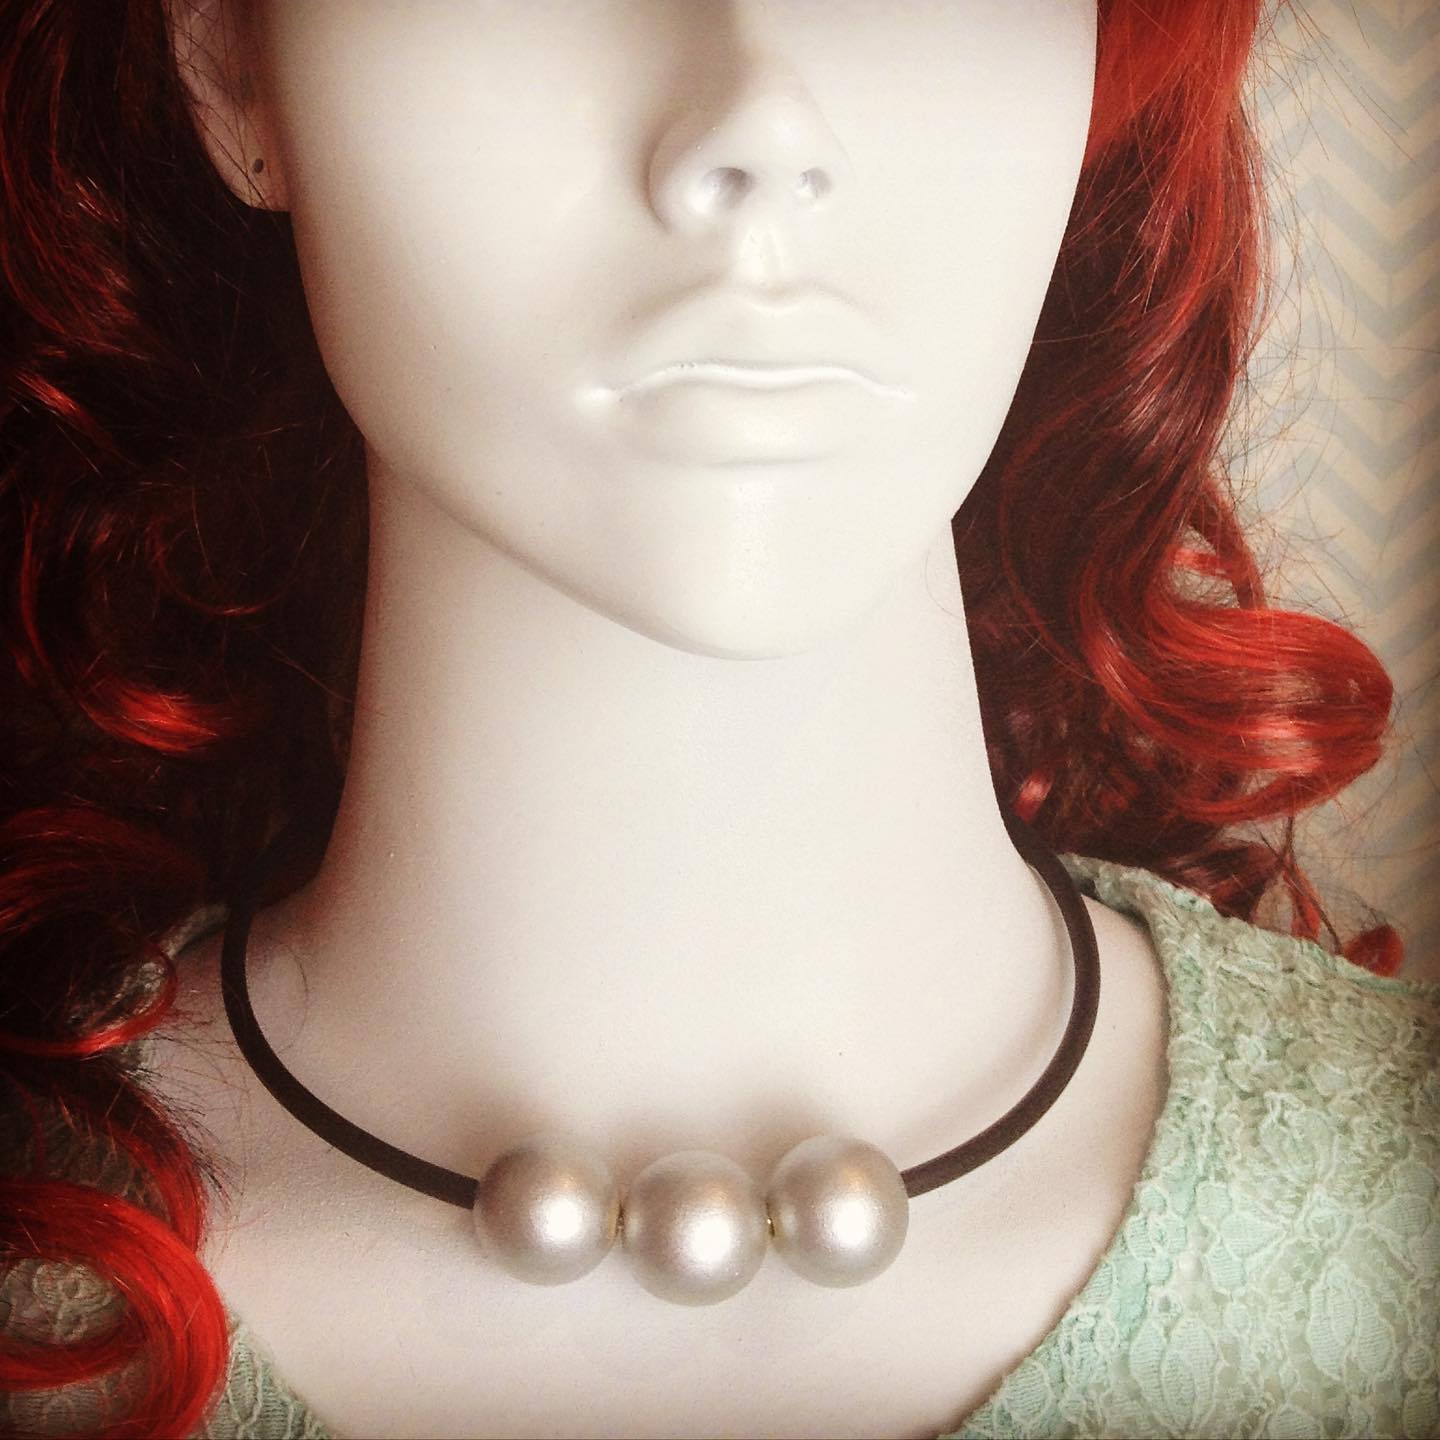 Add our silver and black necklace for the perfect finishing touch to your outfit. ️ #redinsteadshop #silver #beads #beadsjewelry #jewellery #jewelry #necklace #necklaces #necklaceoftheday #black